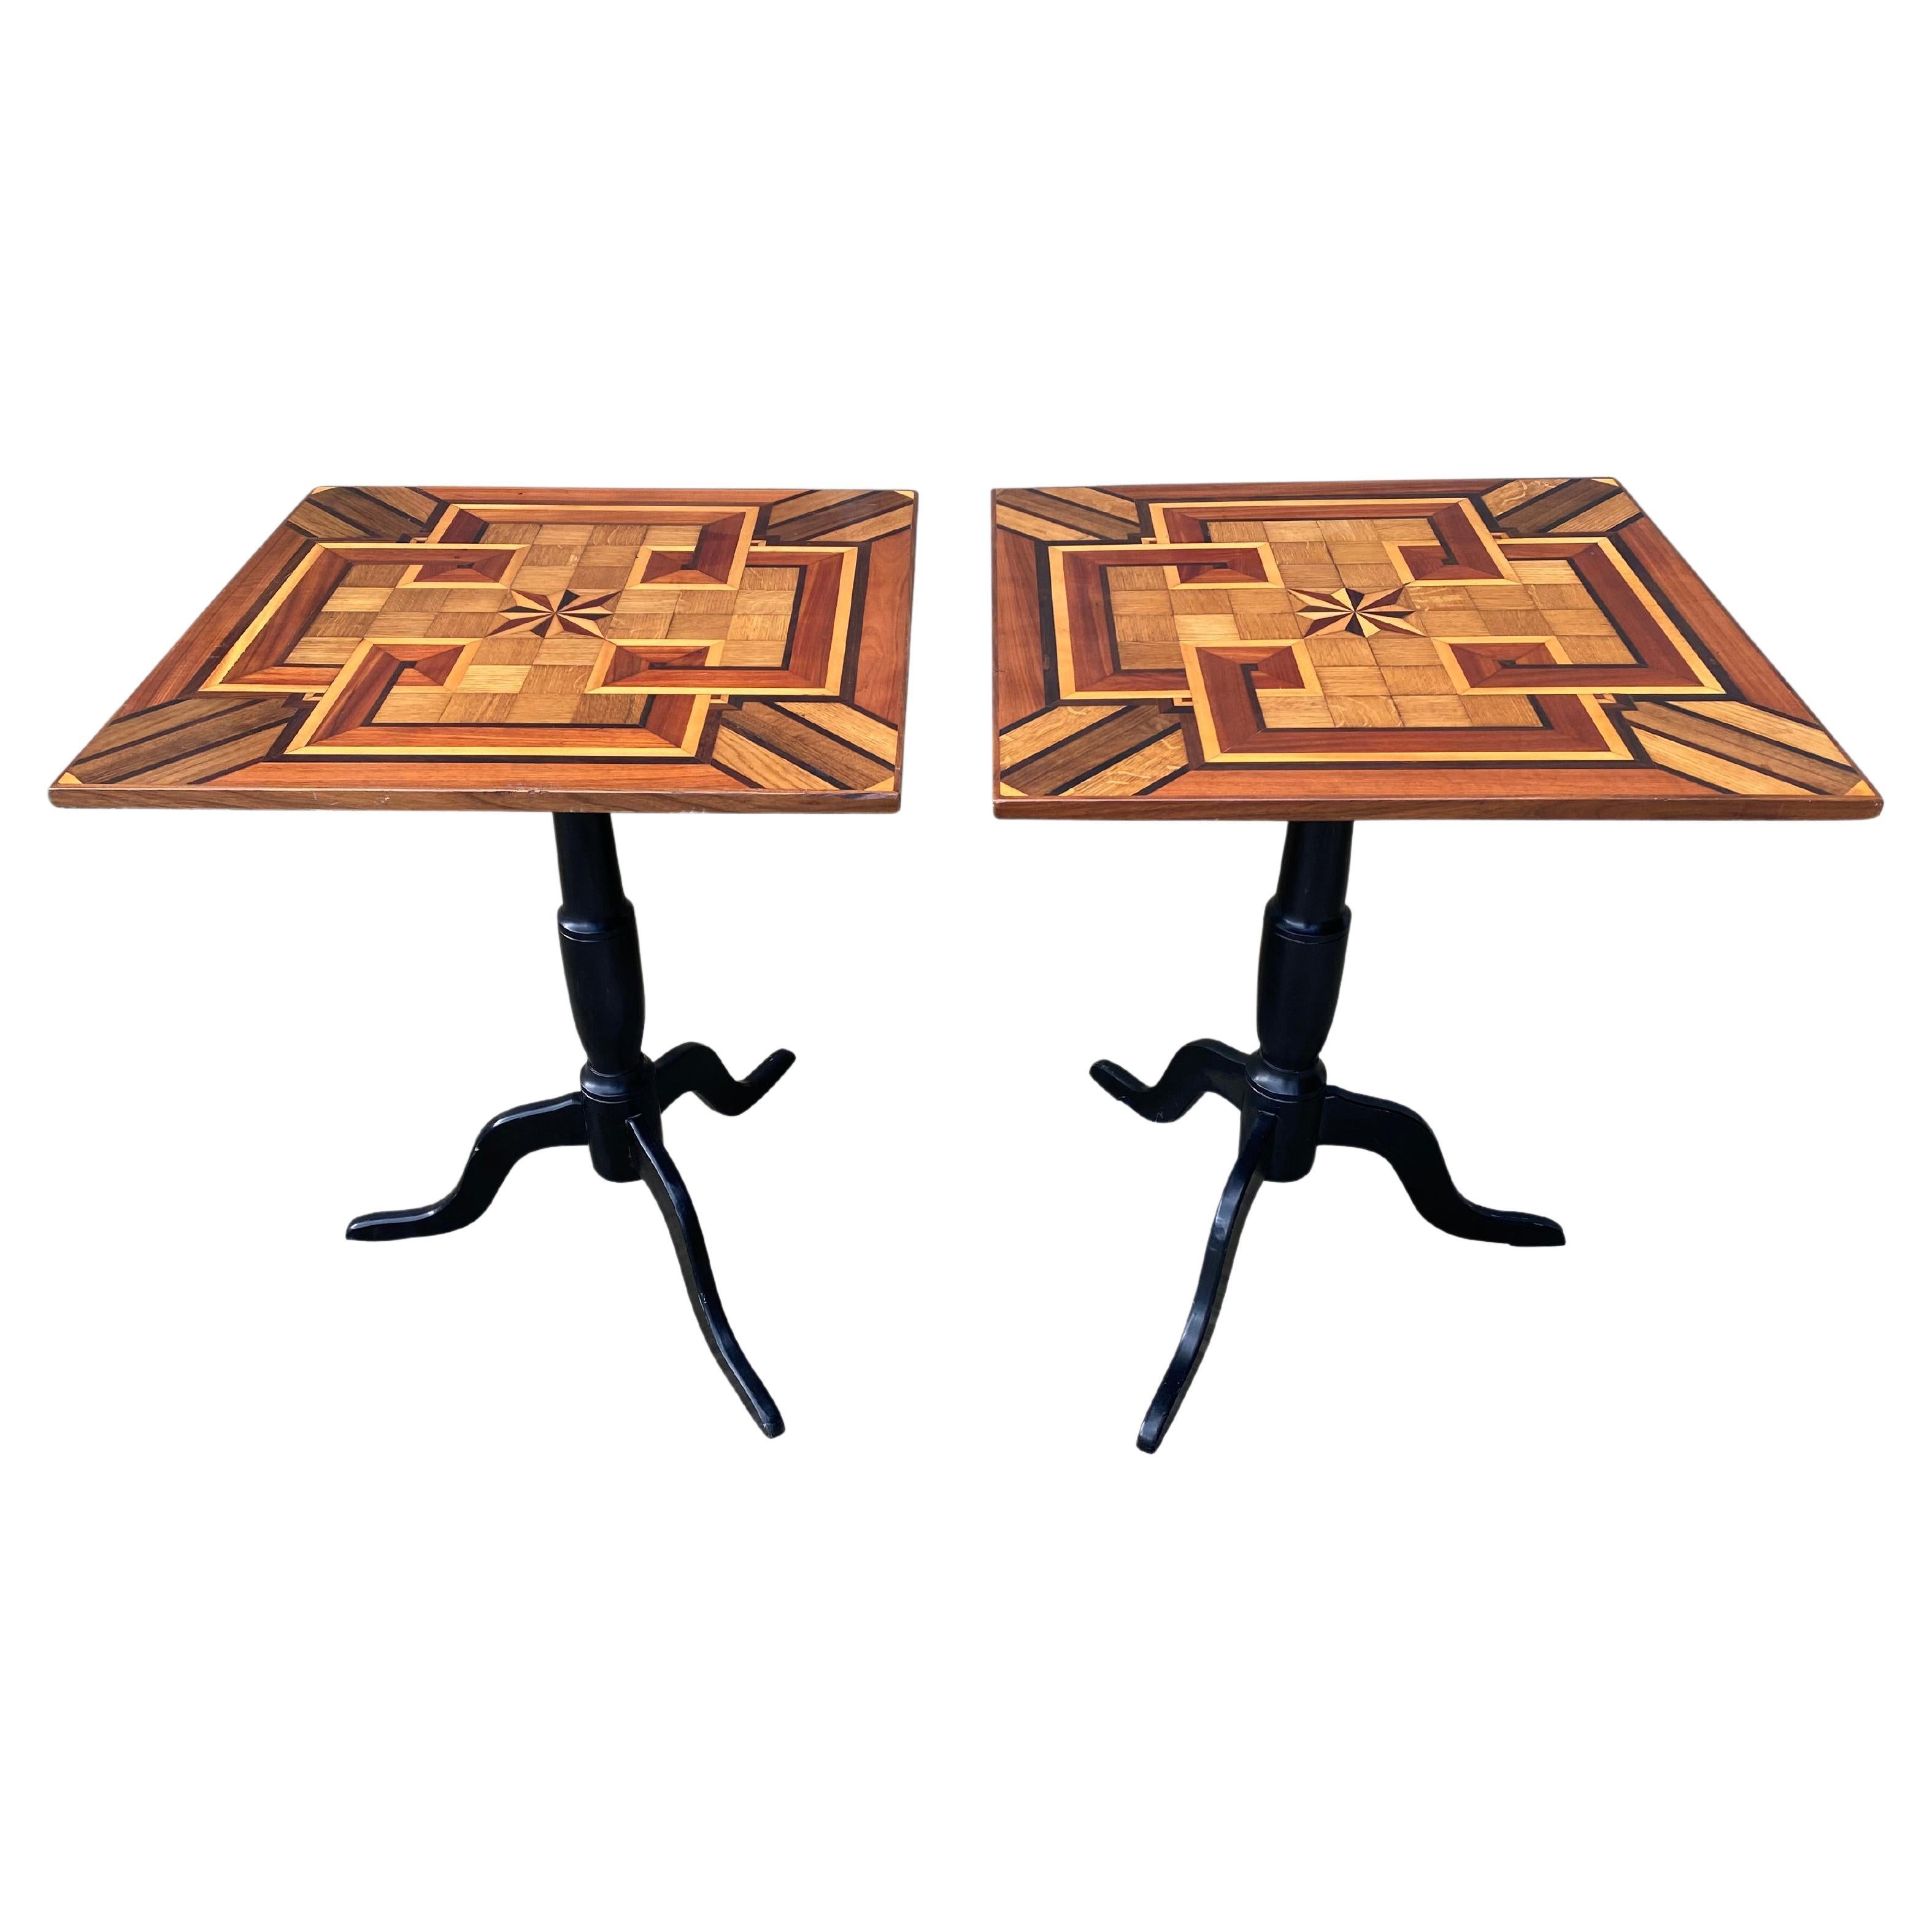 Pair of 19th Century Geometric Inlay & Marquetry Side Tables